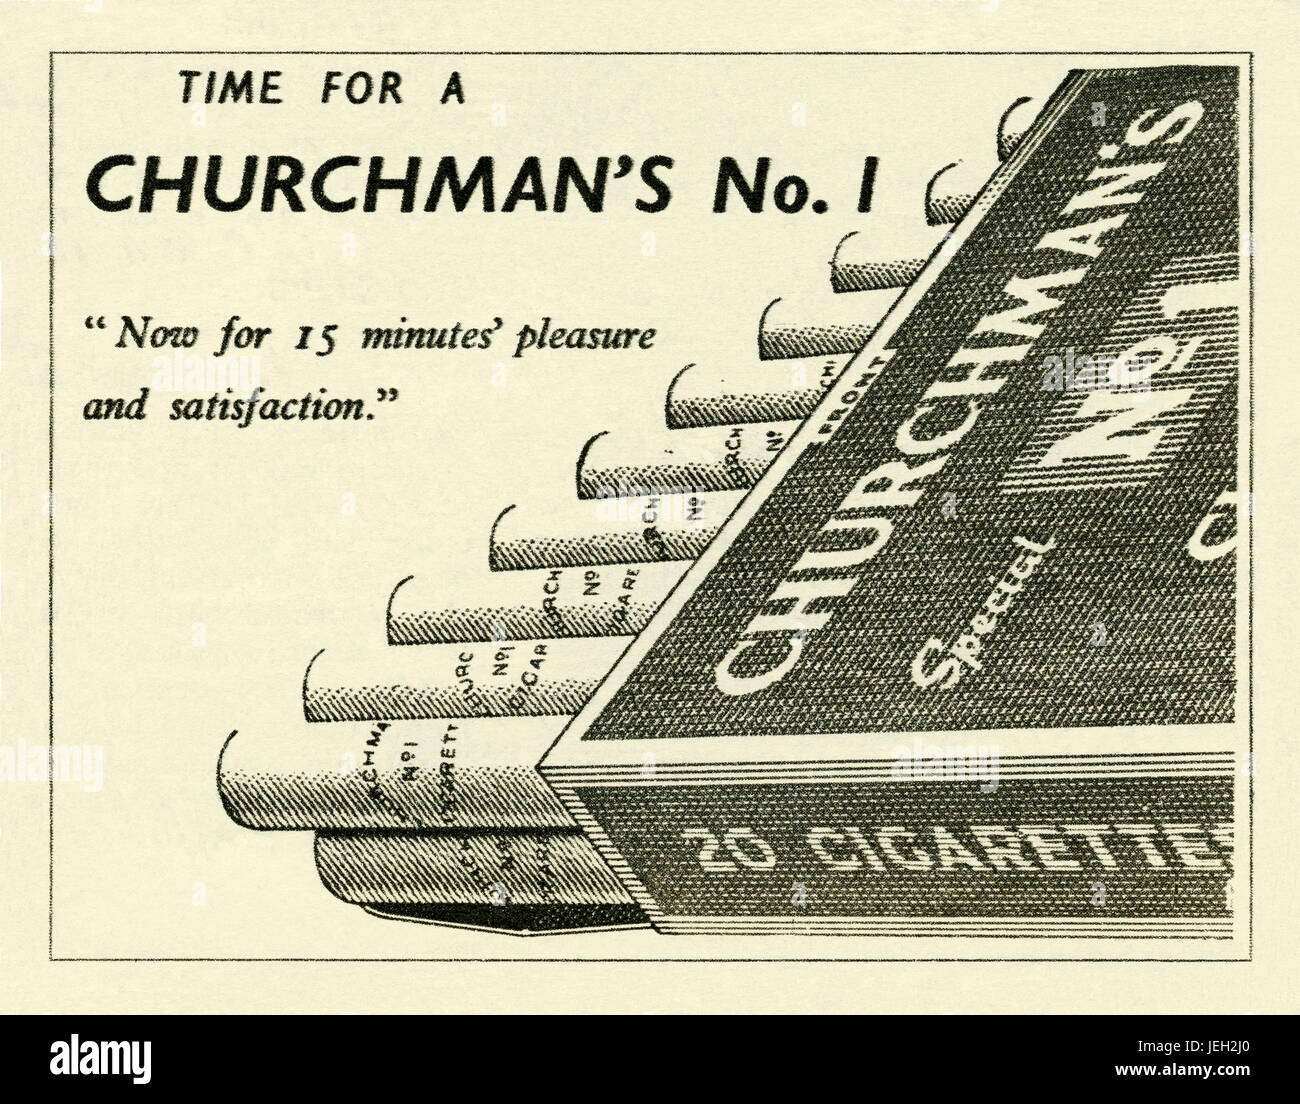 An advert for Churchman's Special No 1 cigarettes - it appeared in a magazine published in the UK in 1947 Stock Photo